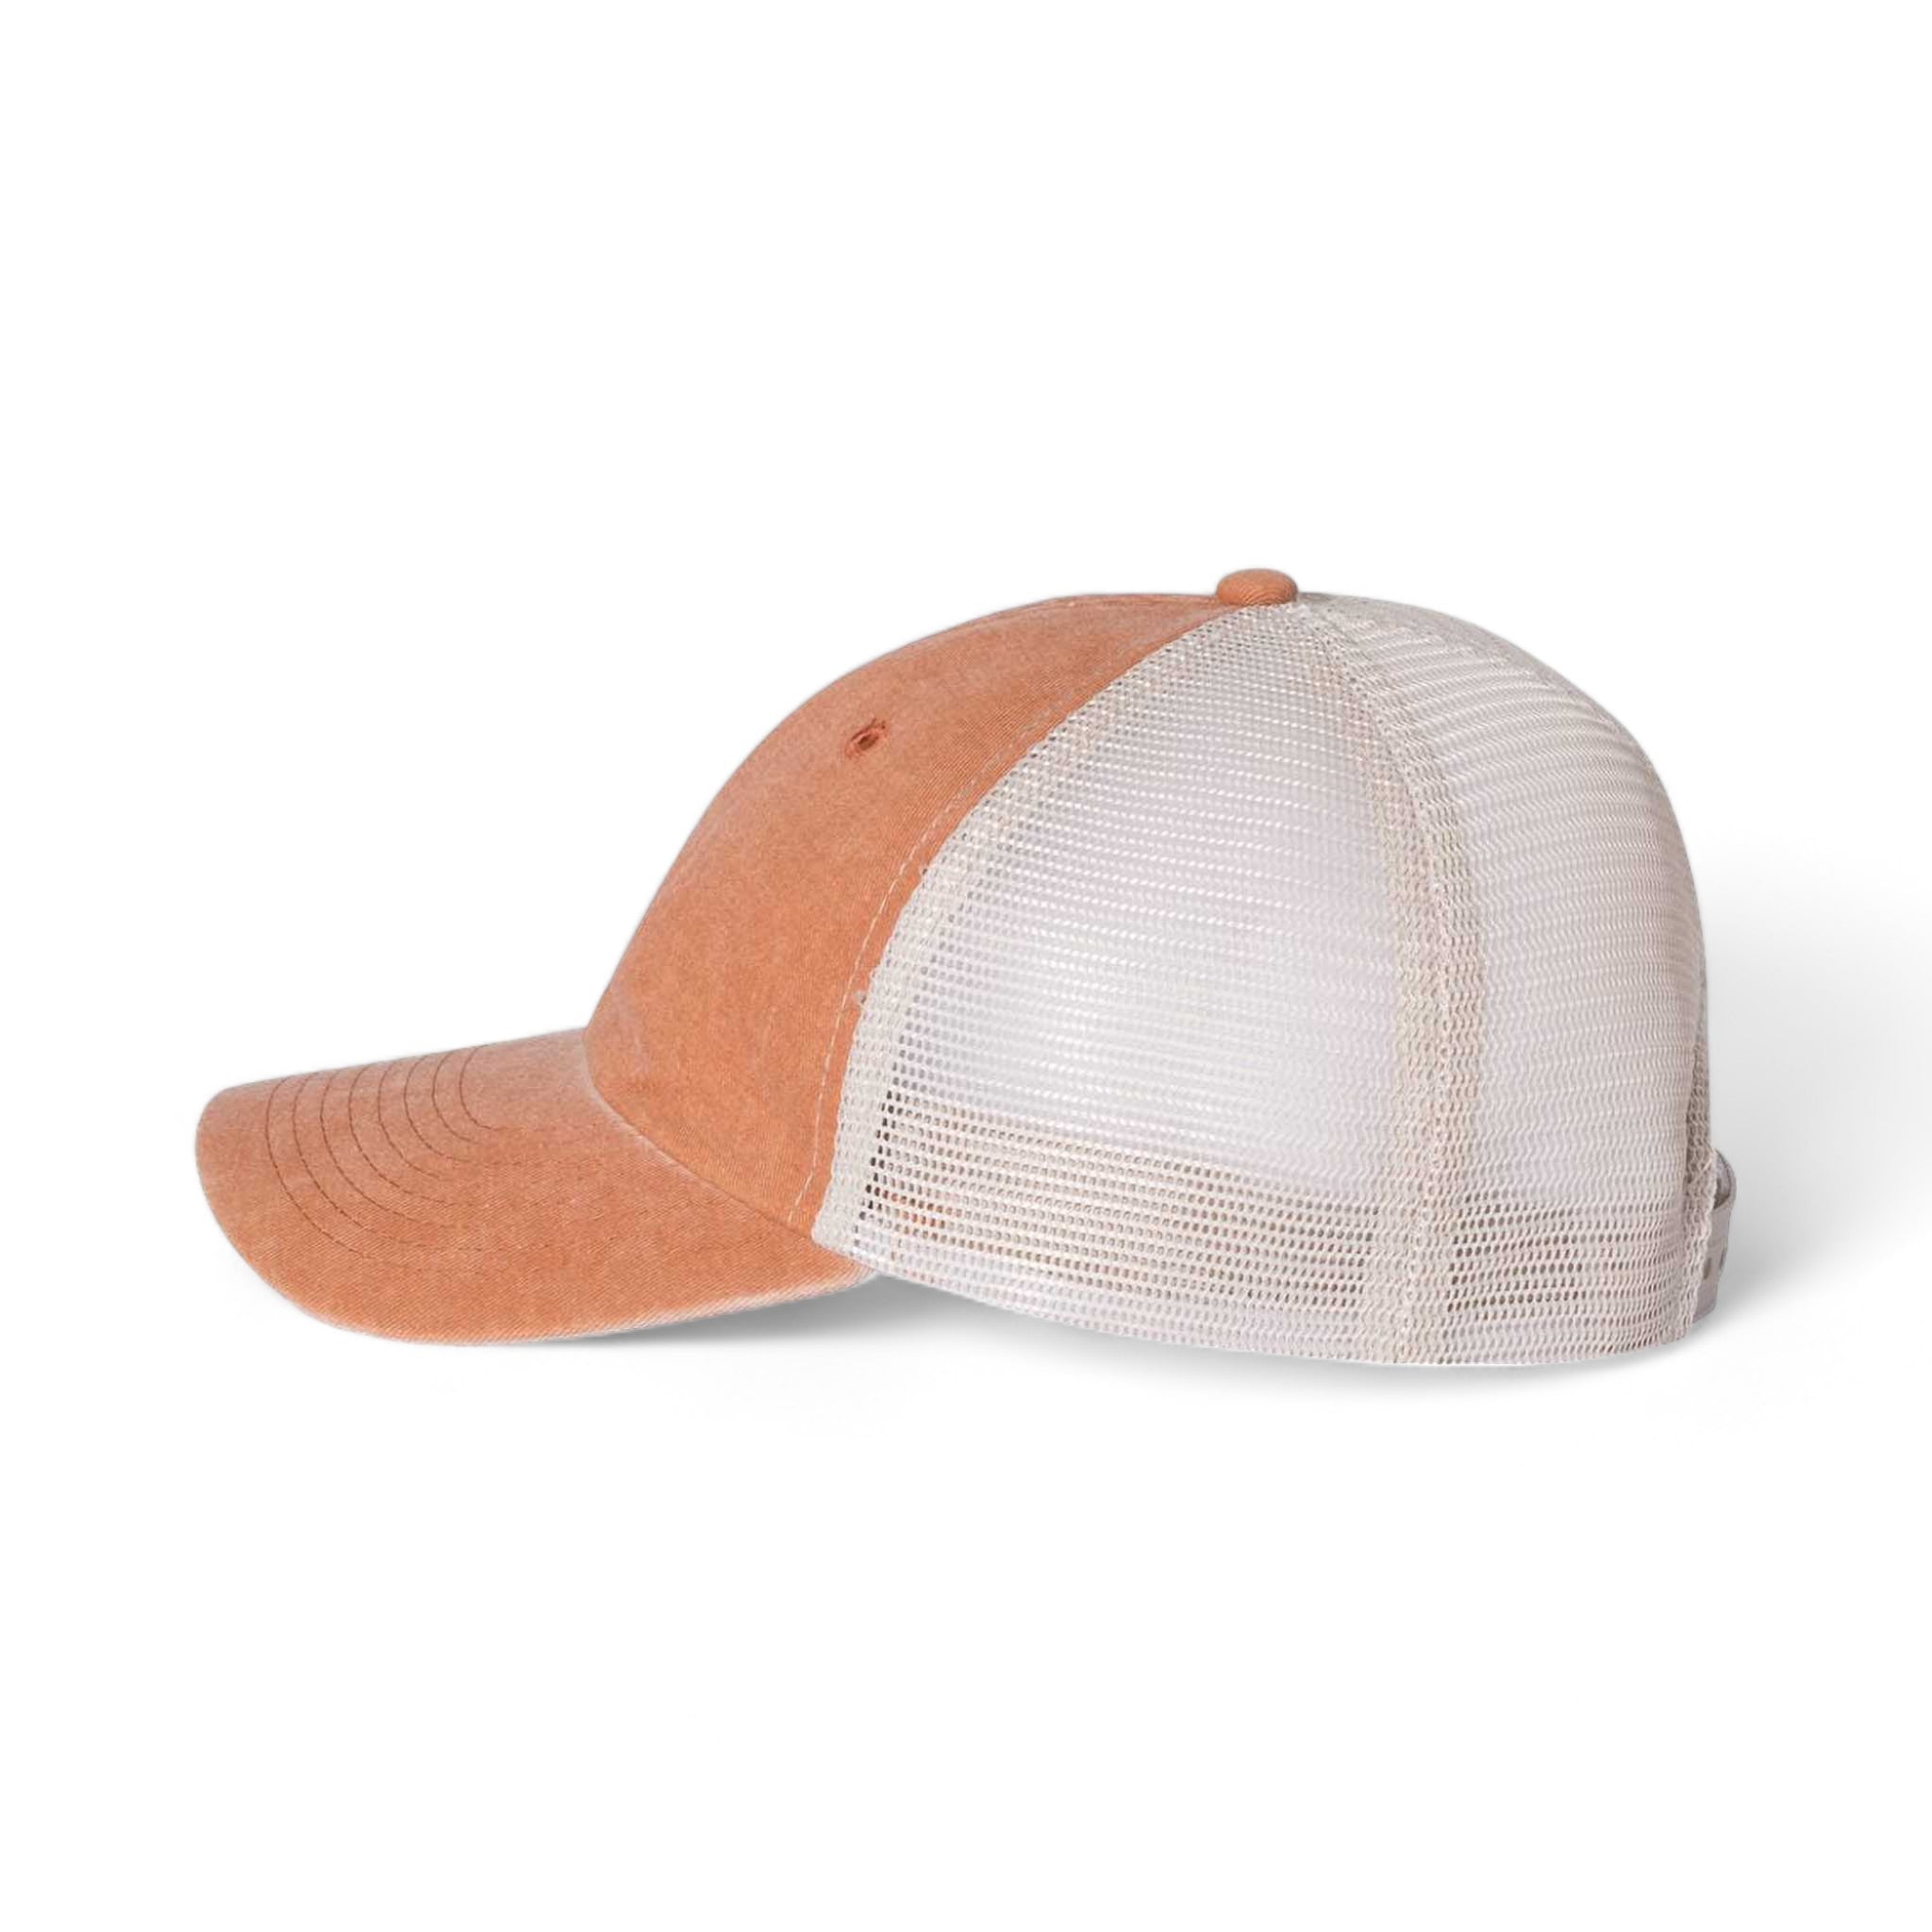 Side view of Sportsman SP510 custom hat in texas orange and stone